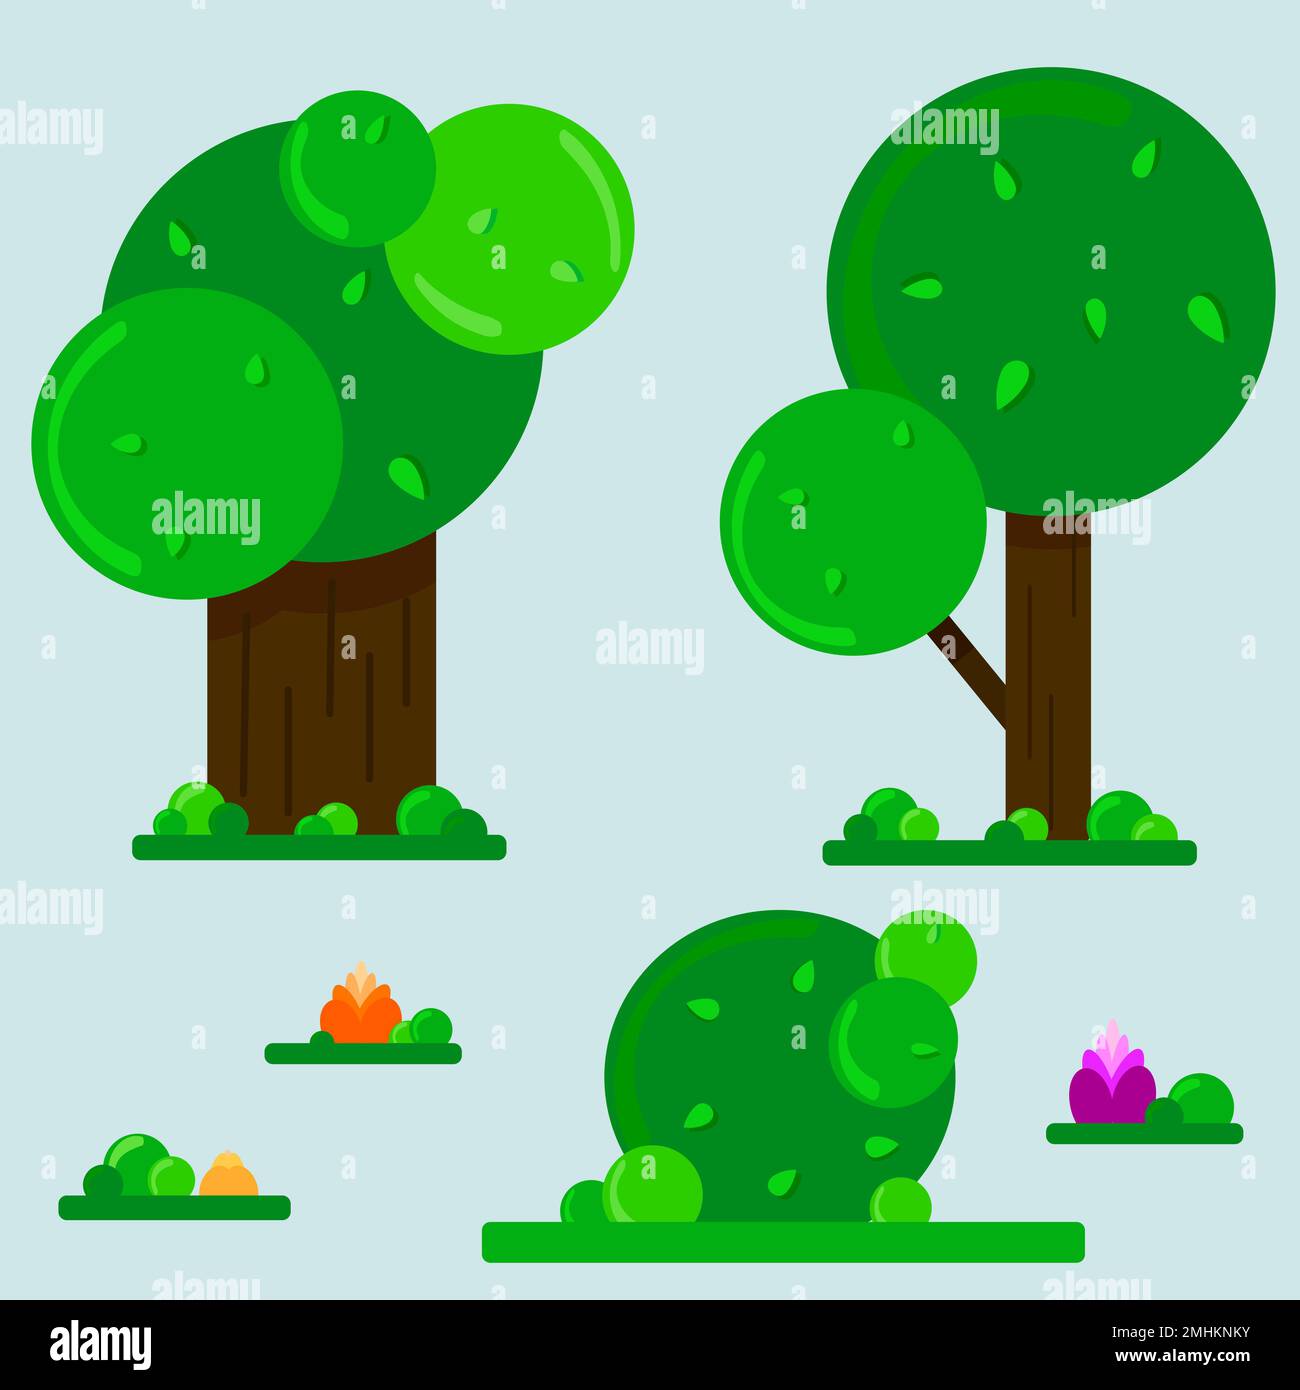 Stylized summer trees and bush with grass in the background. Flowers and leaves, grass and trees with brown trunks - all drawn with simple round shape Stock Vector